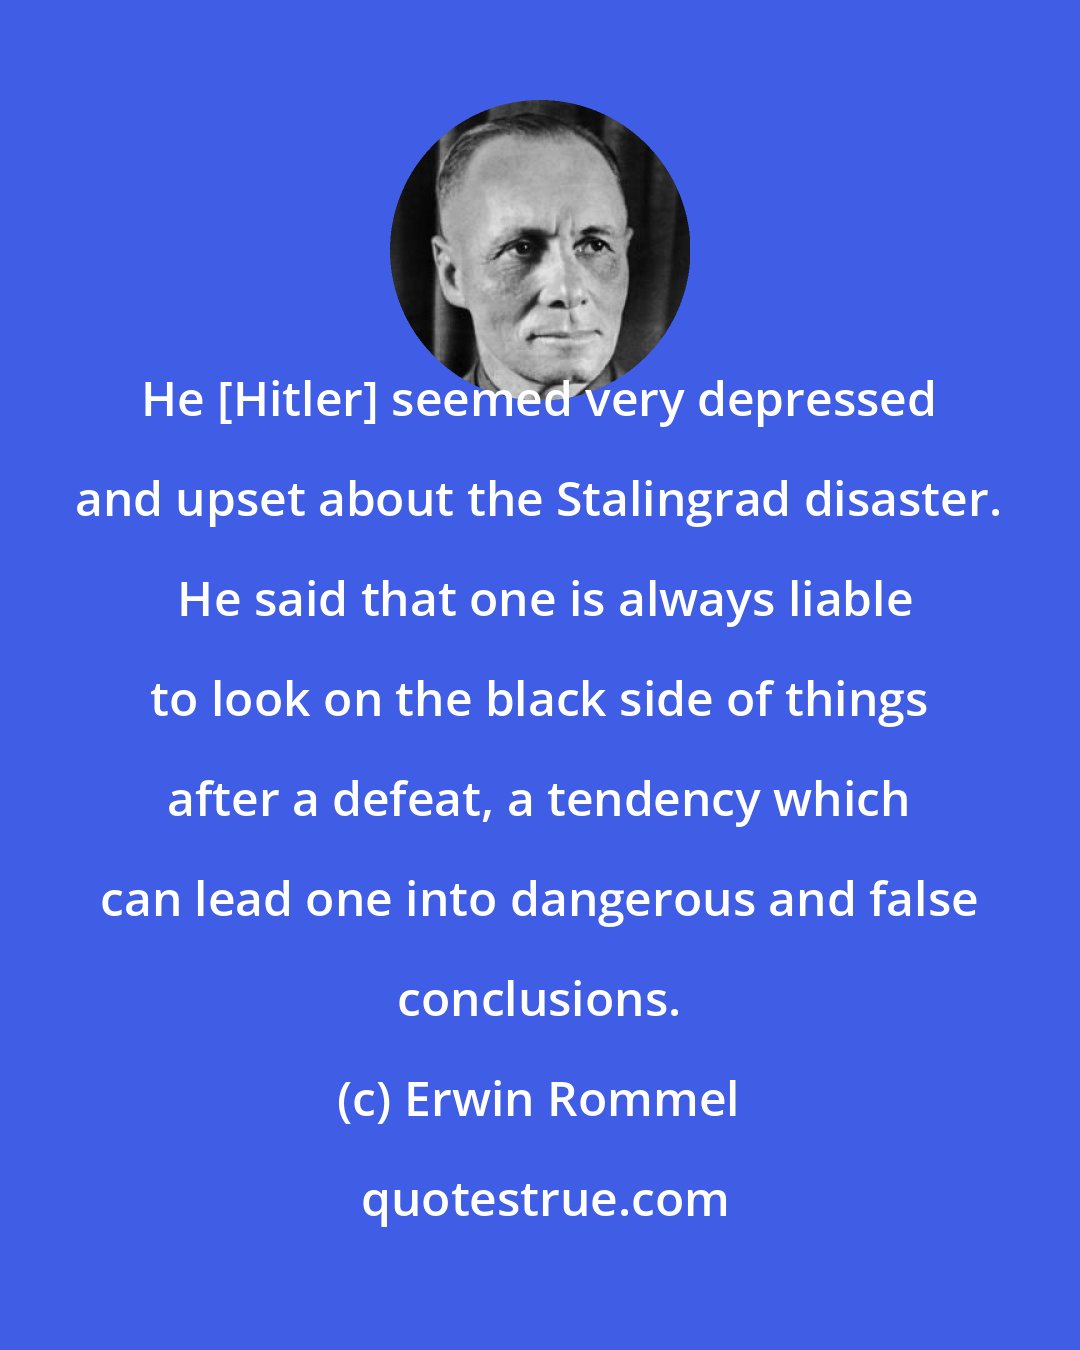 Erwin Rommel: He [Hitler] seemed very depressed and upset about the Stalingrad disaster.  He said that one is always liable to look on the black side of things after a defeat, a tendency which can lead one into dangerous and false conclusions.